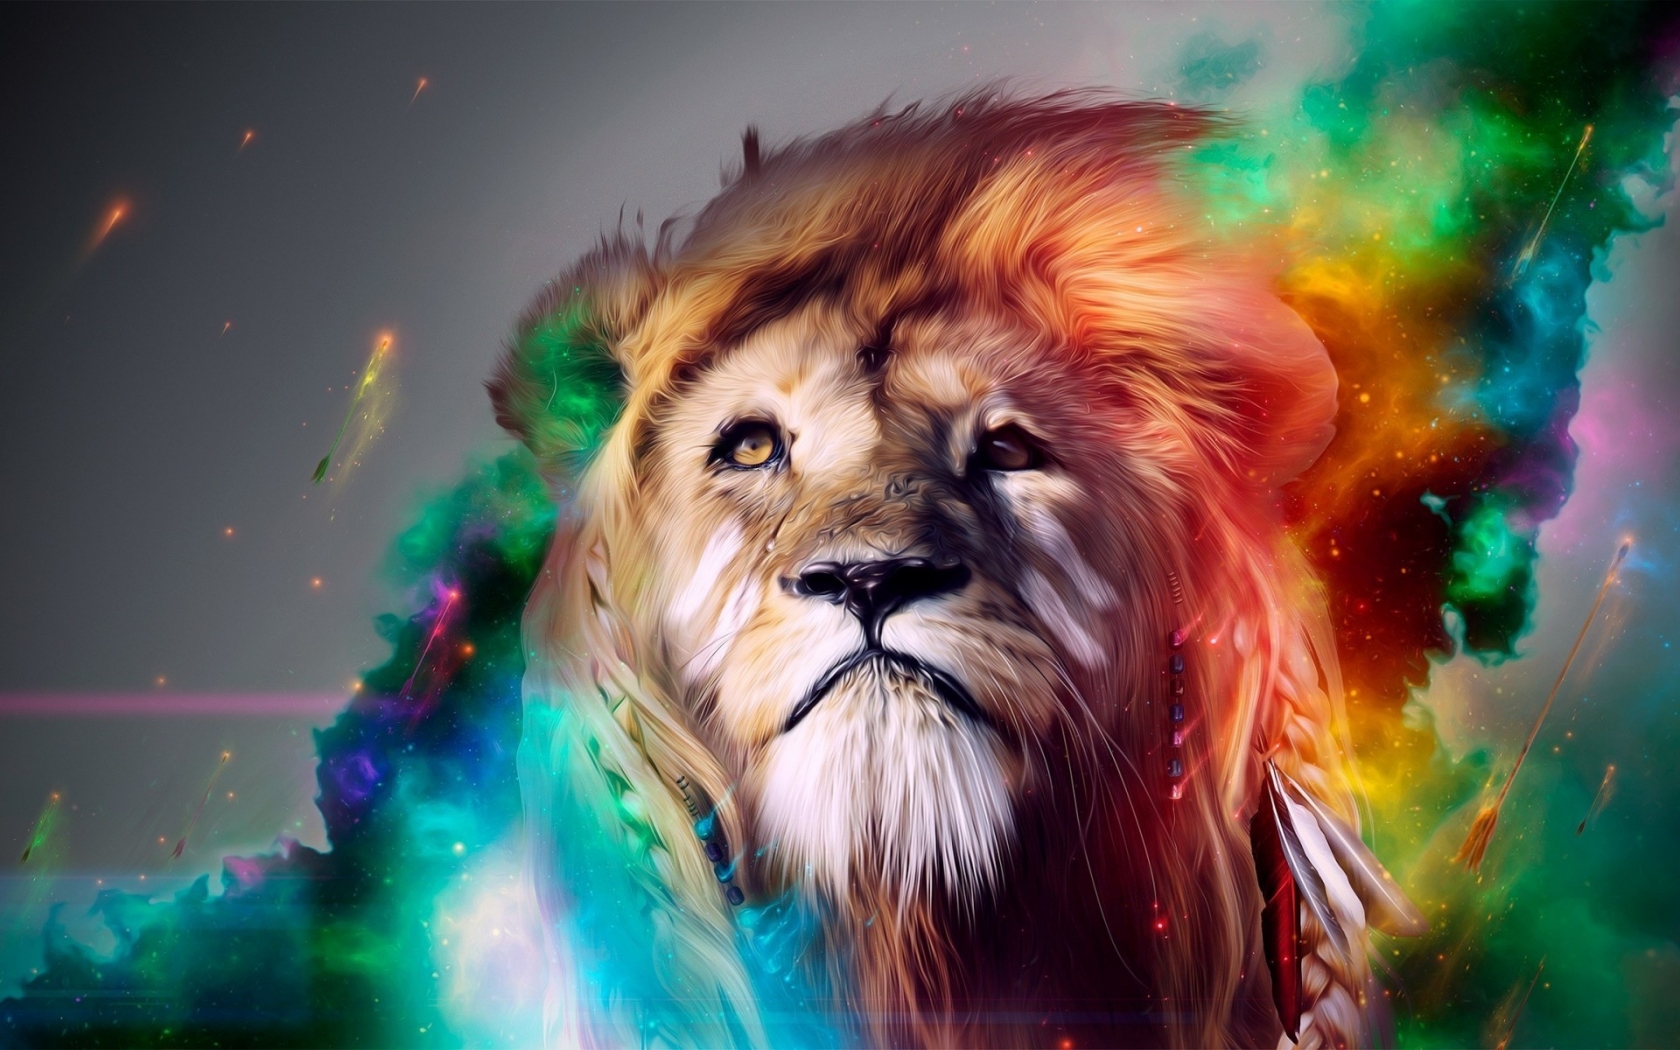 Rainbow Lion for 1680 x 1050 widescreen resolution